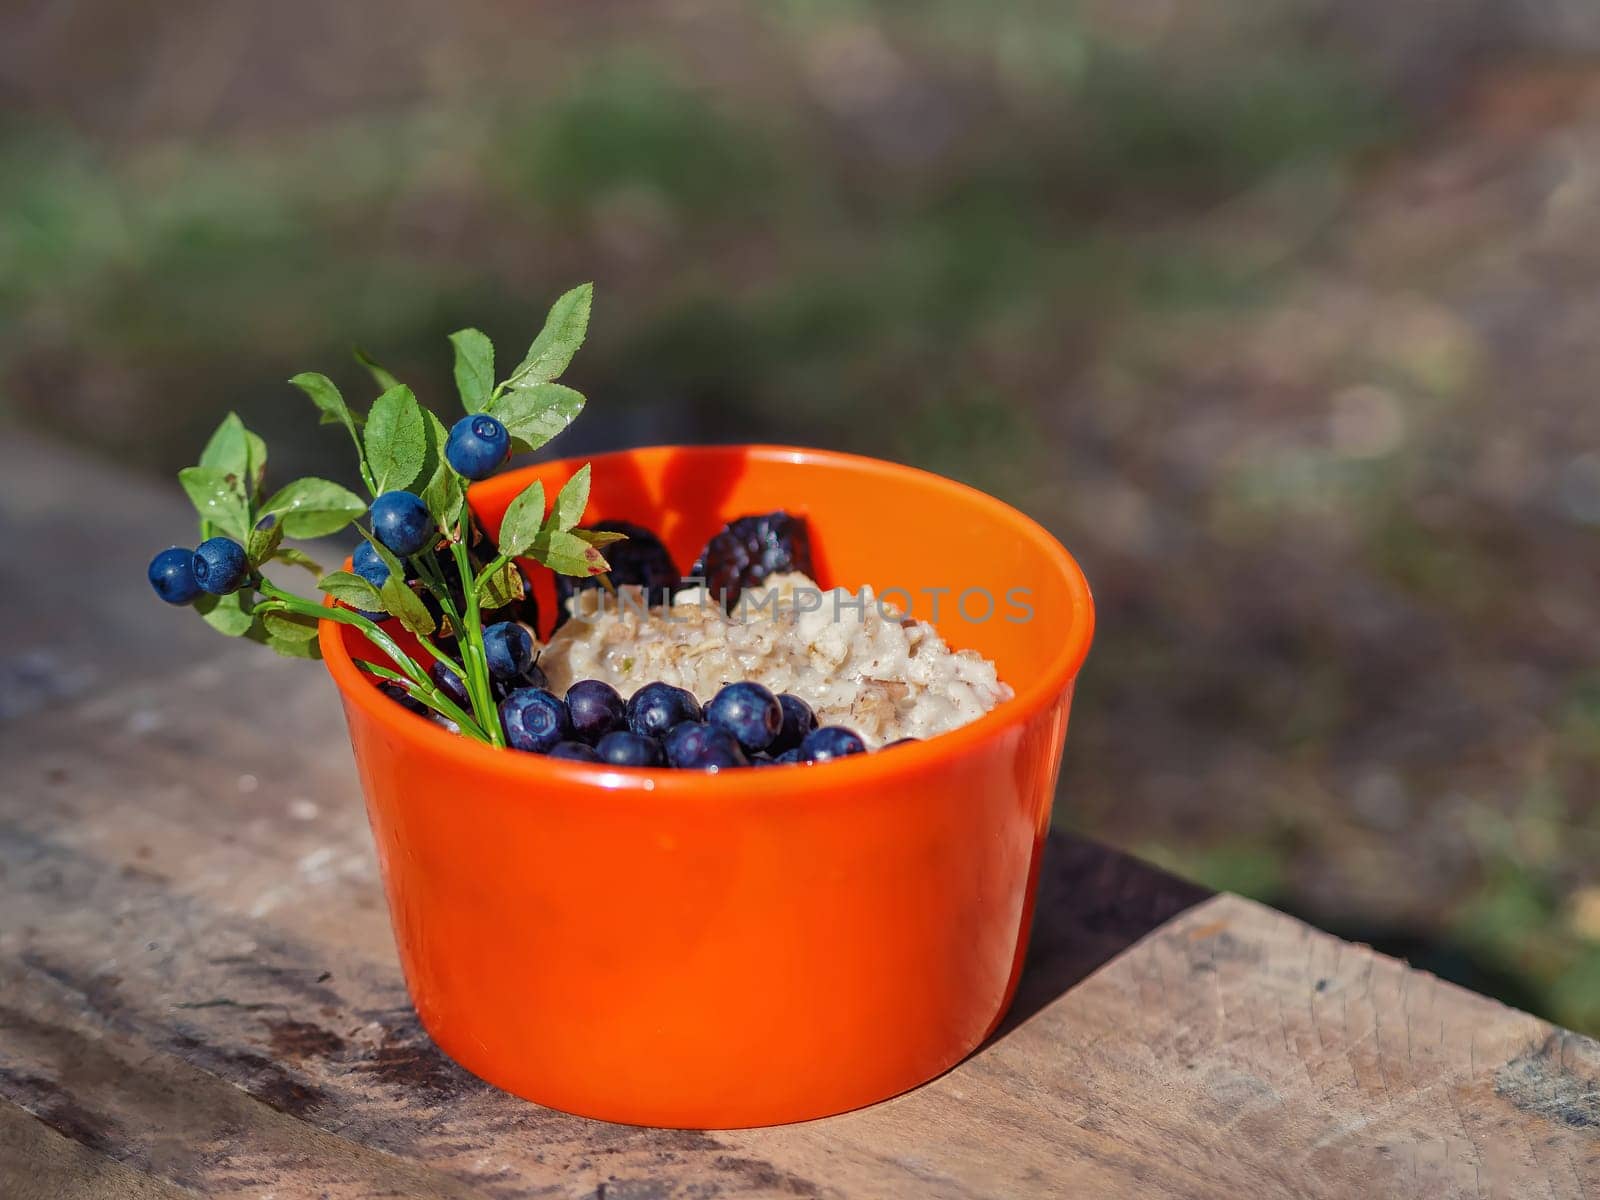 Oatmeal with blueberries in an orange plate on the nature in the forest. Hiker's breakfast.